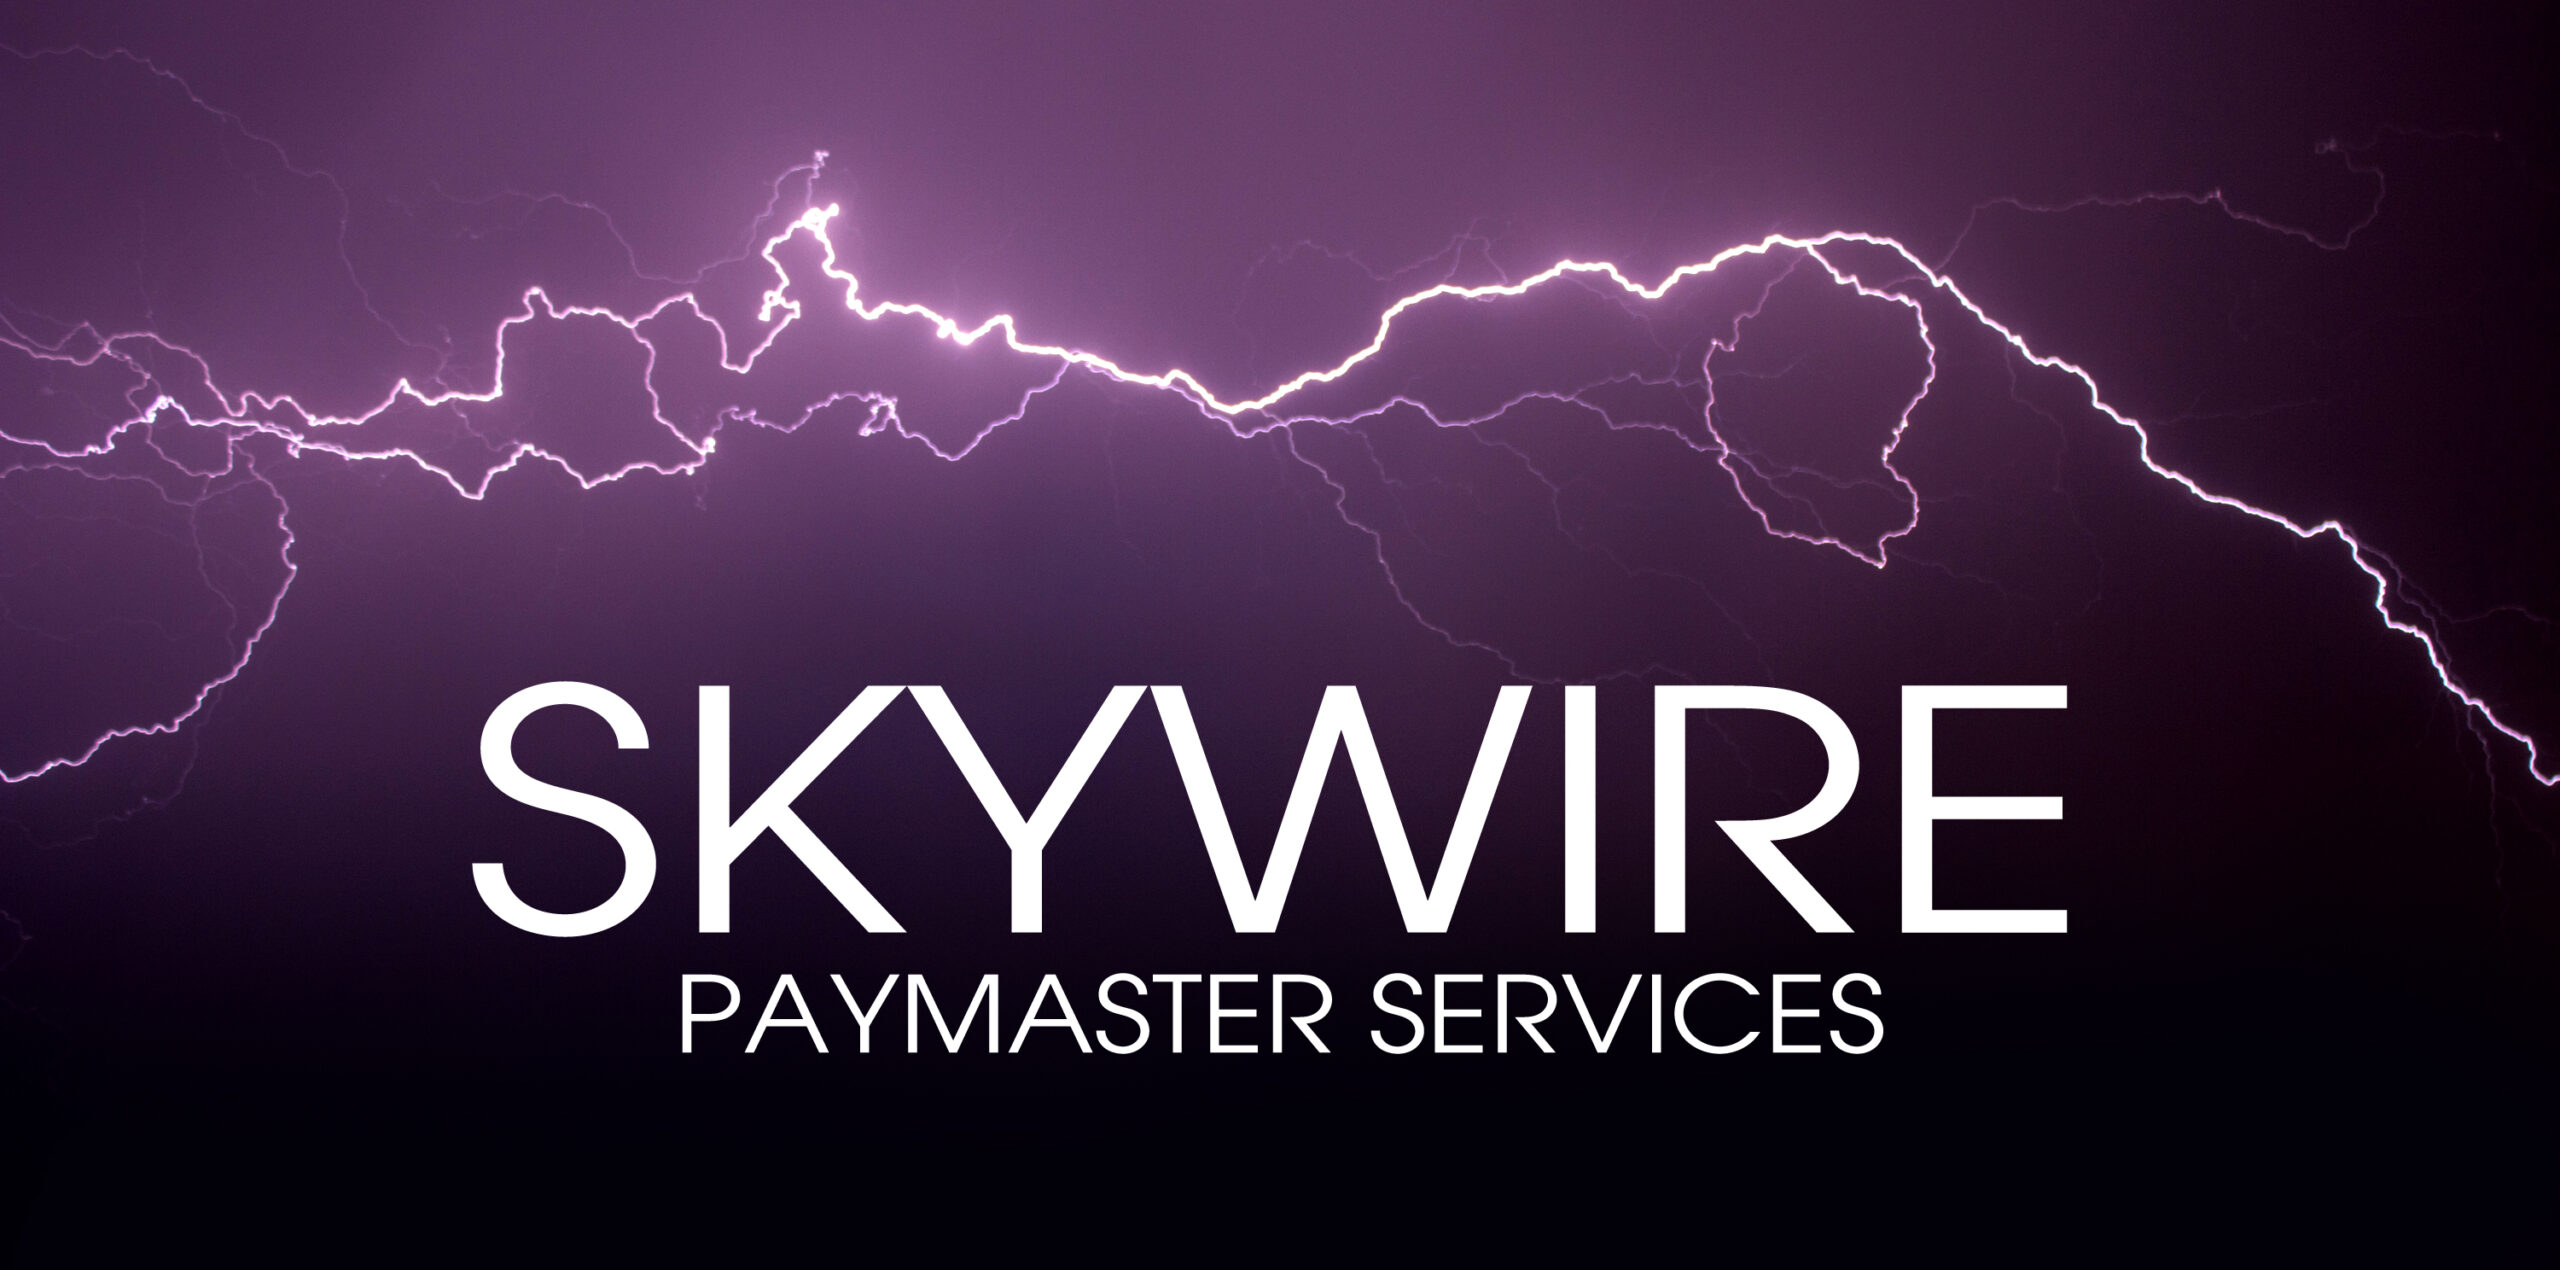 Skywire Paymaster Services 